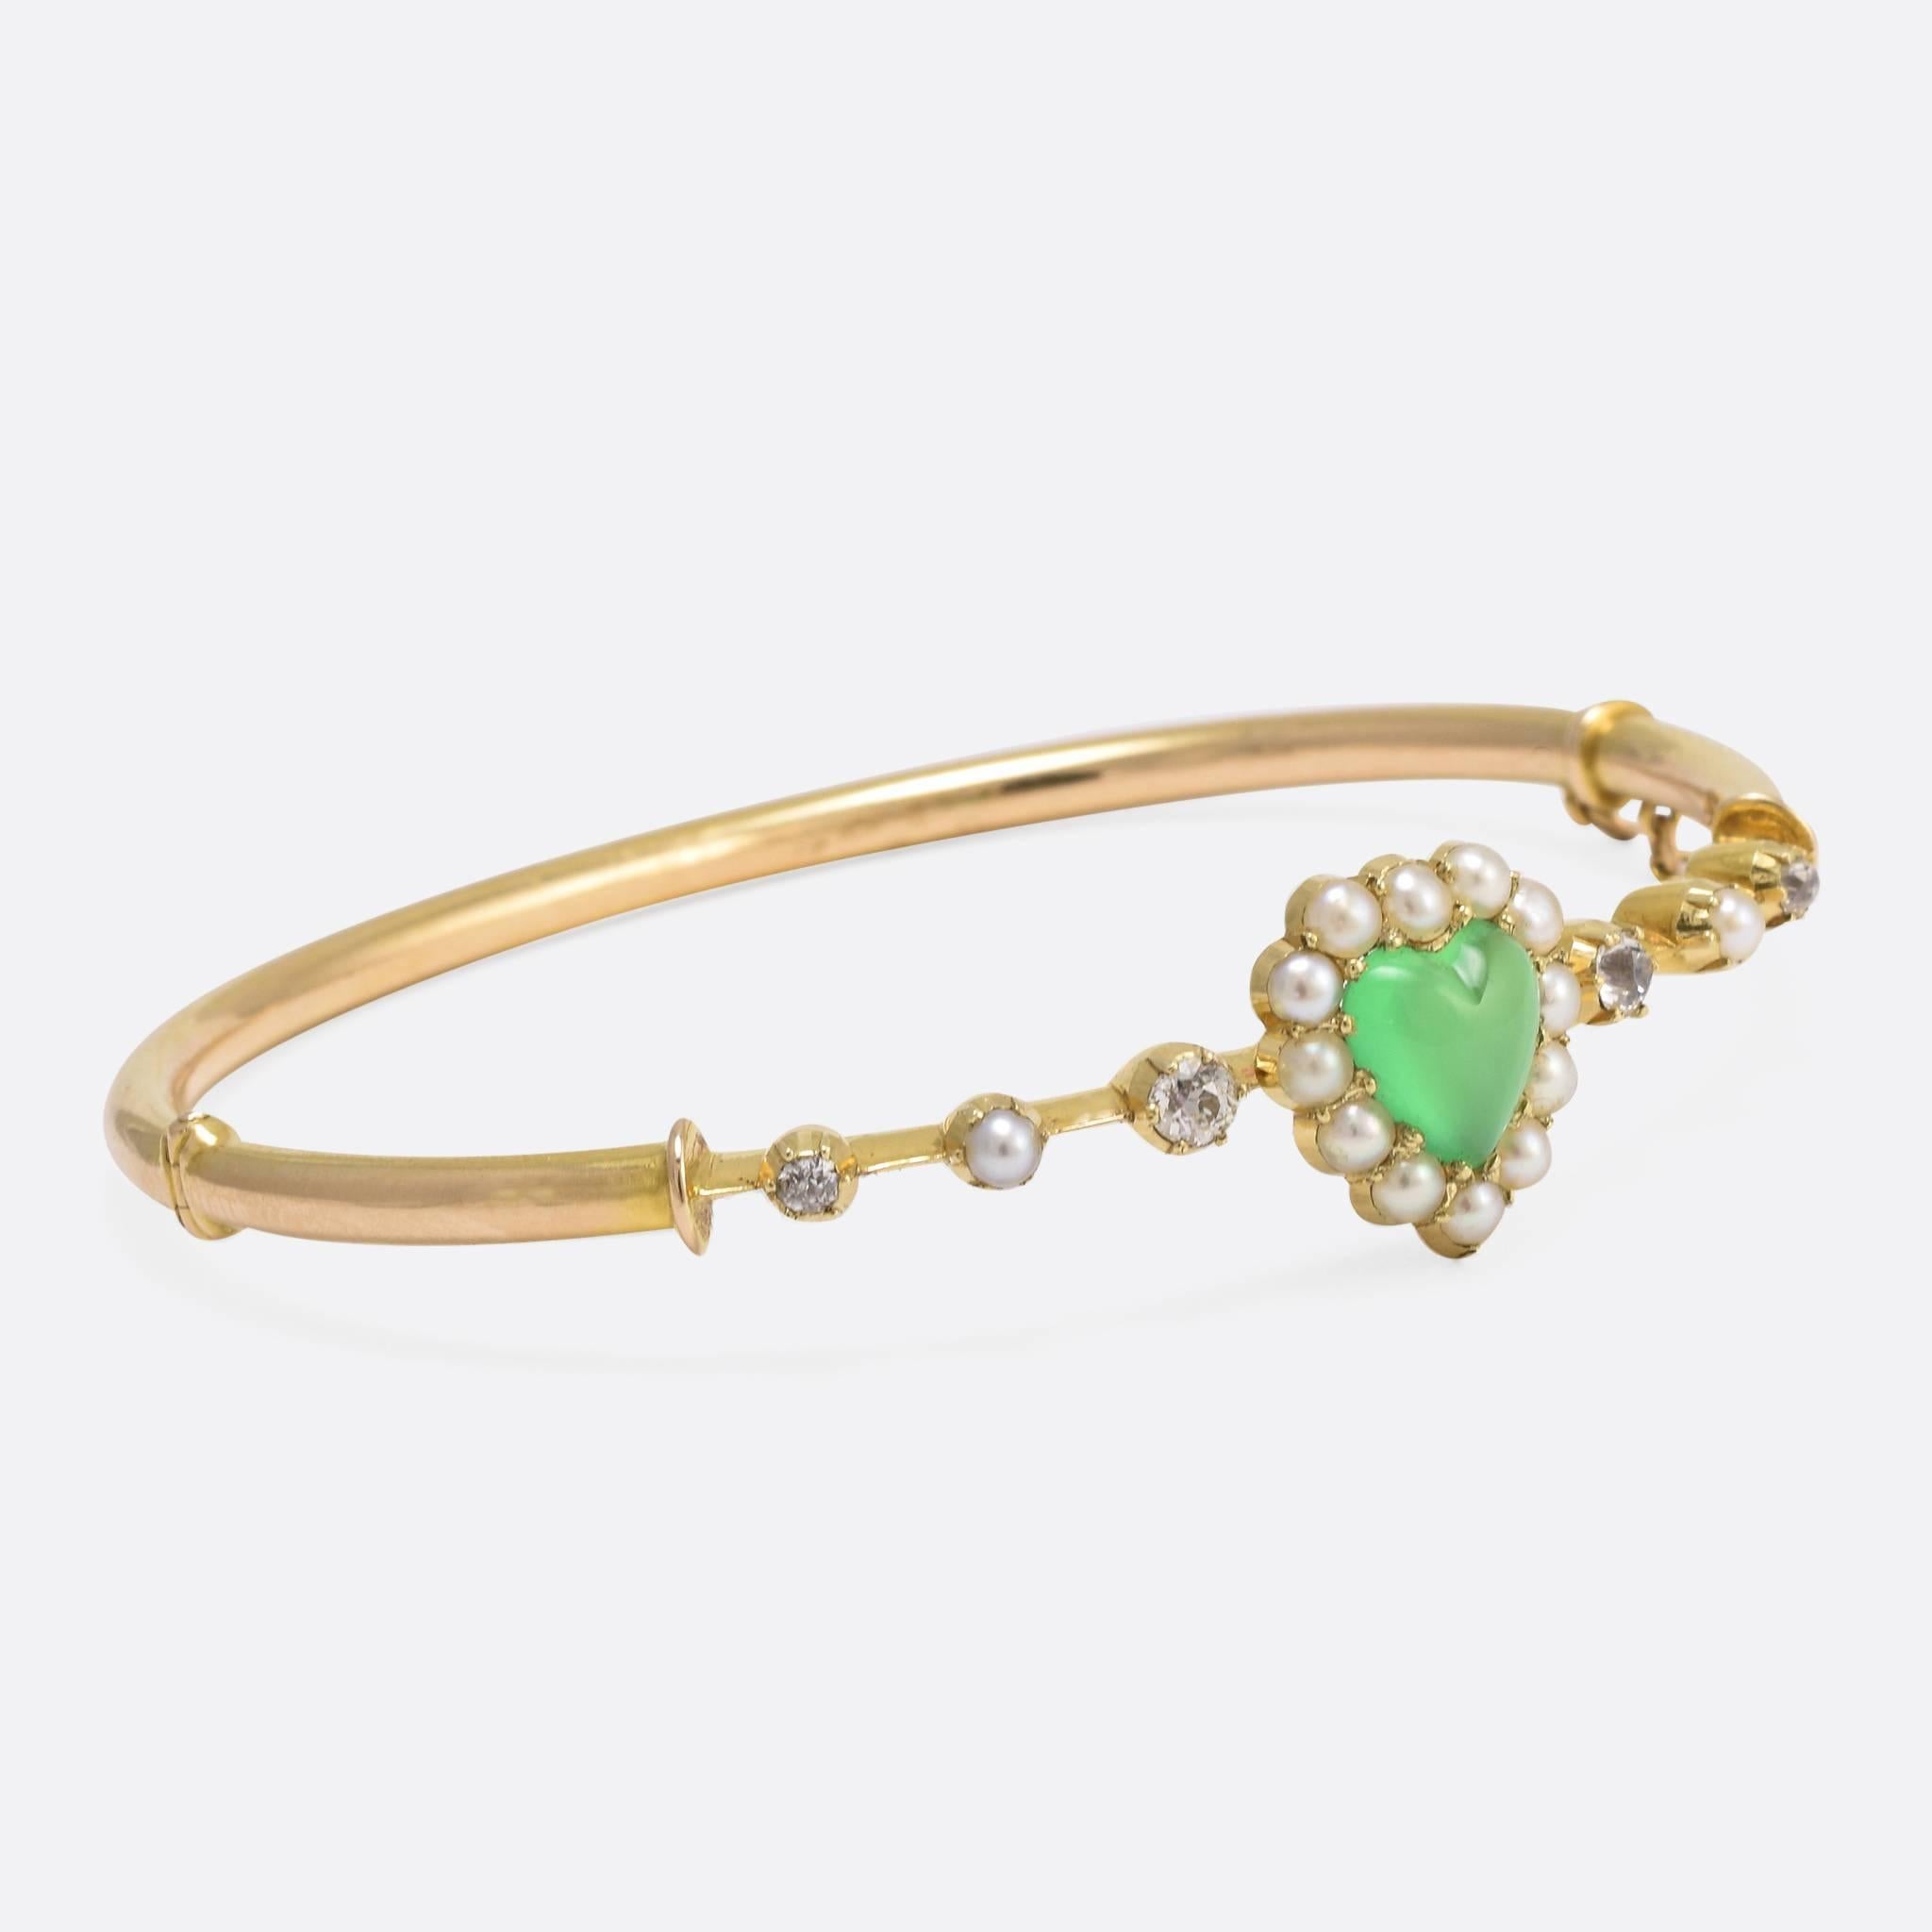 This attractive Victorian bangle features a heart-shaped head, set with a gorgeous apple-green chrysoprase cabochon surrounded by natural pearls. The shoulders are set with old mine cut diamonds, along with further pearls. Modelled in 15k yellow